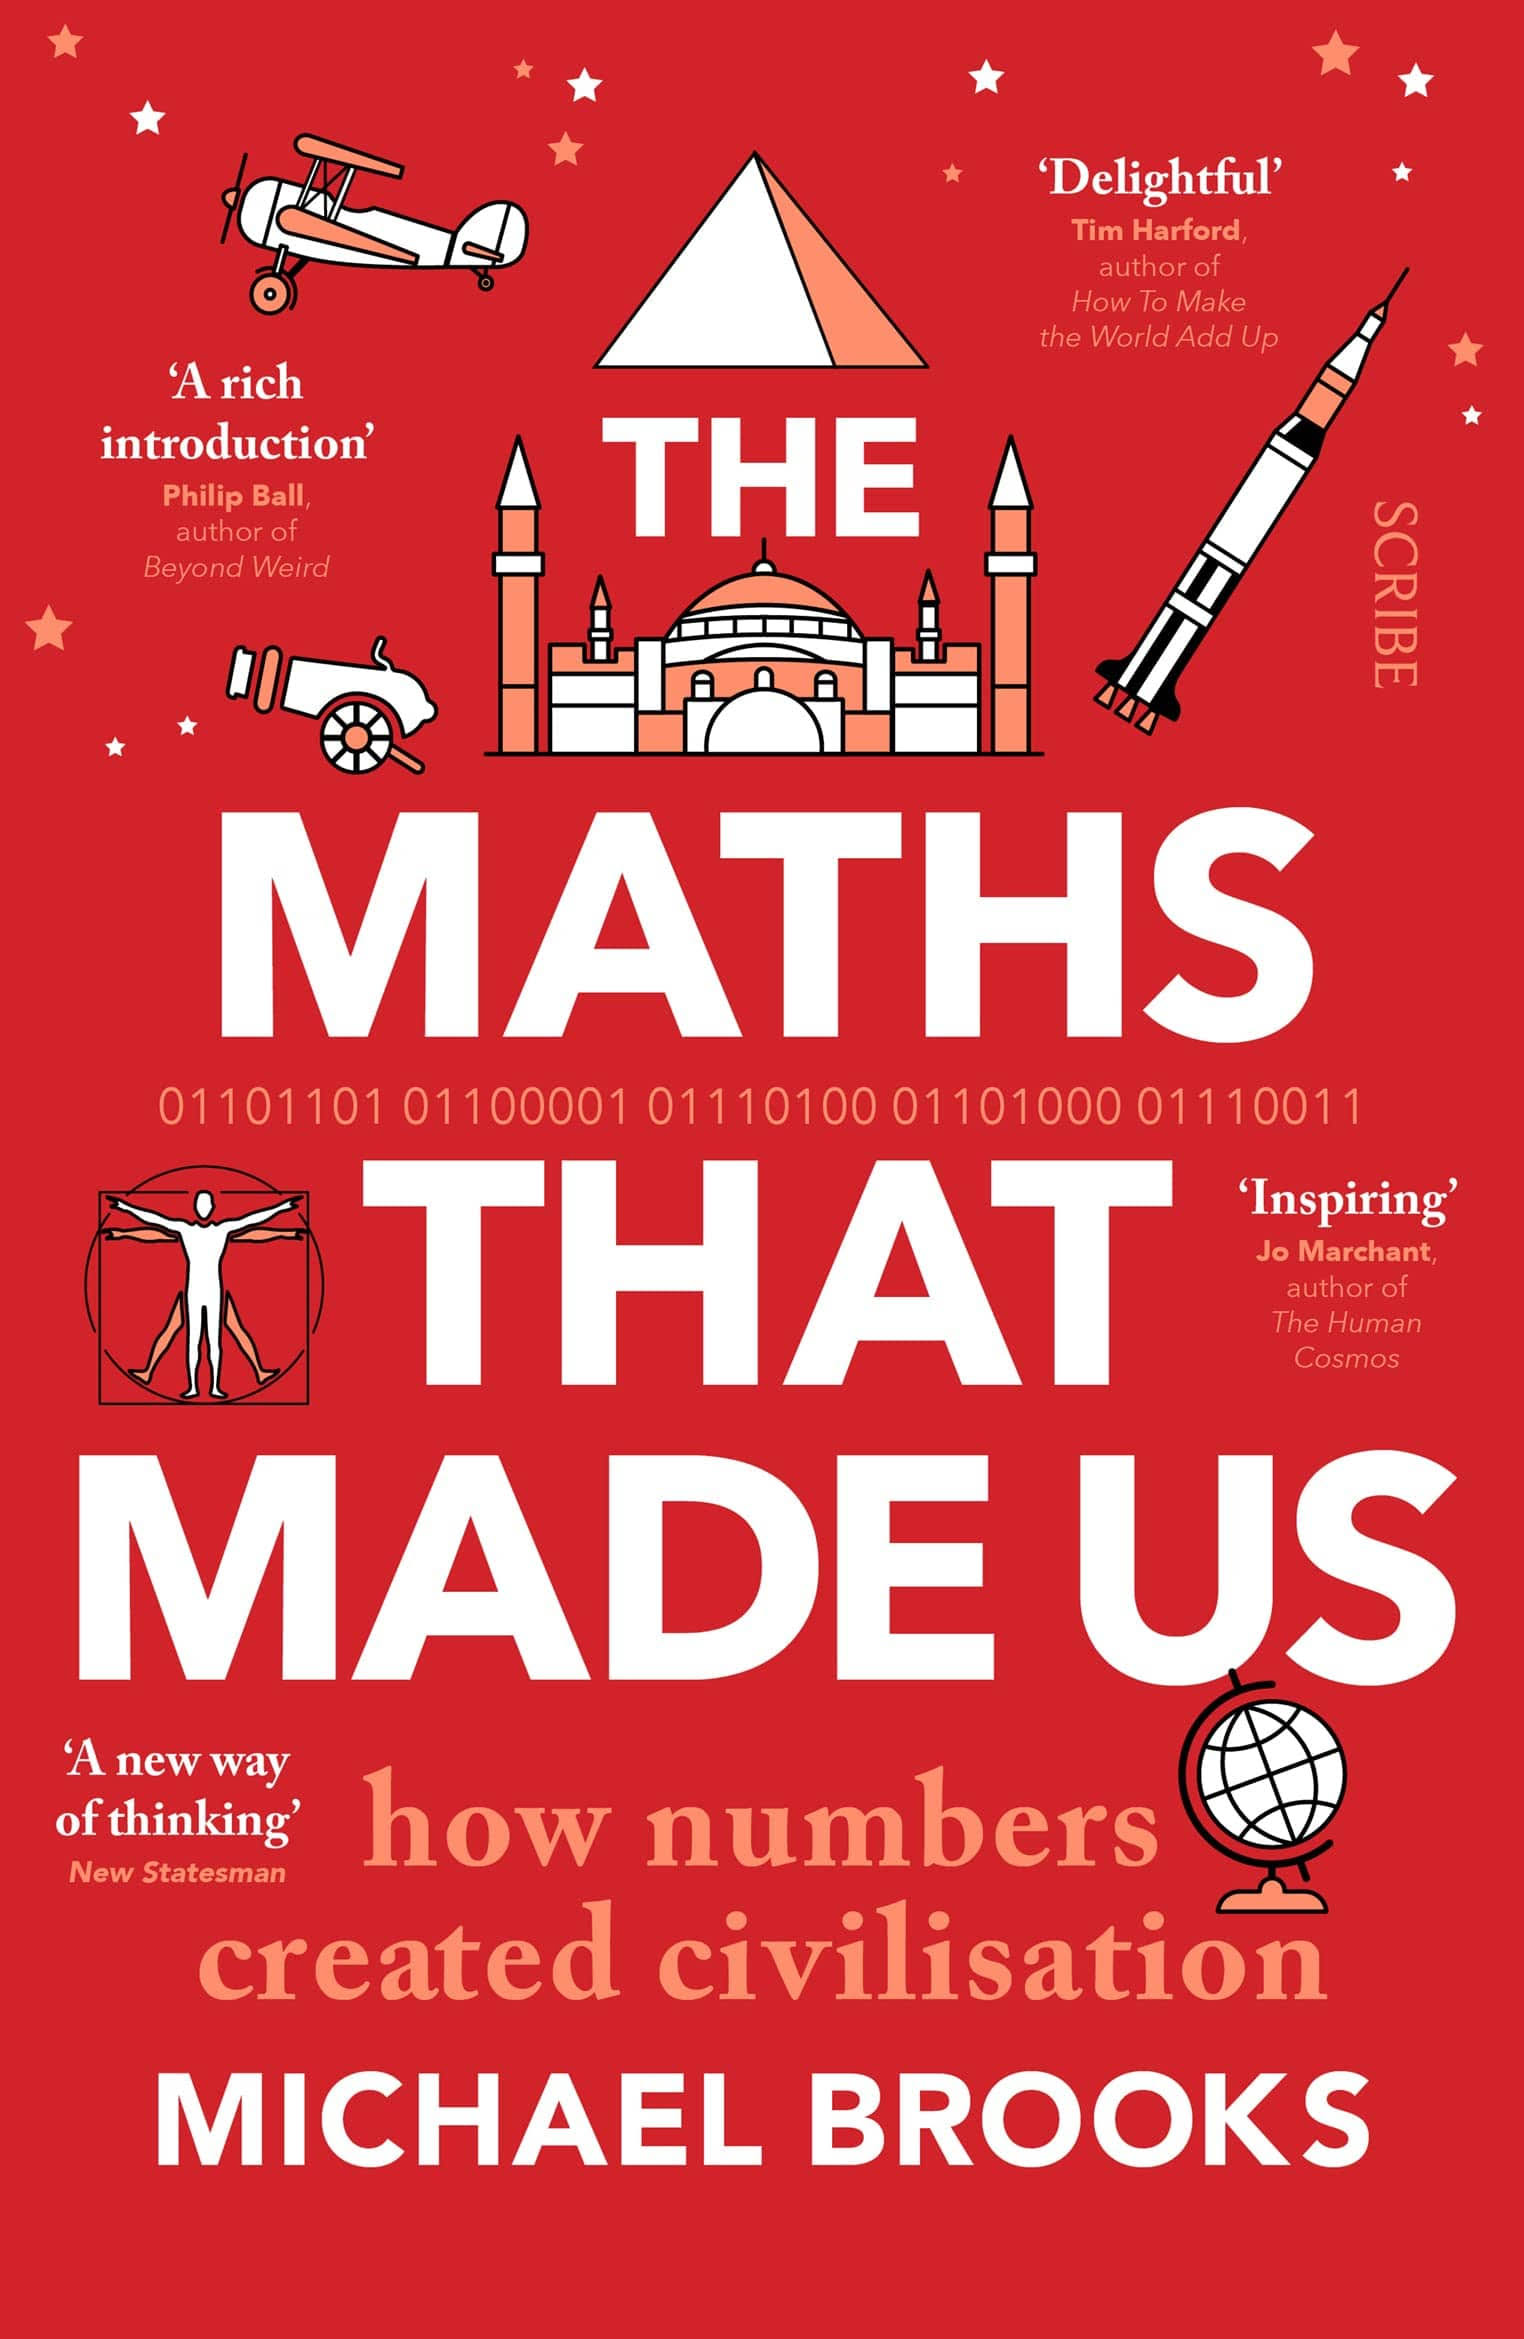 The Maths That Made US by Michael Brooks